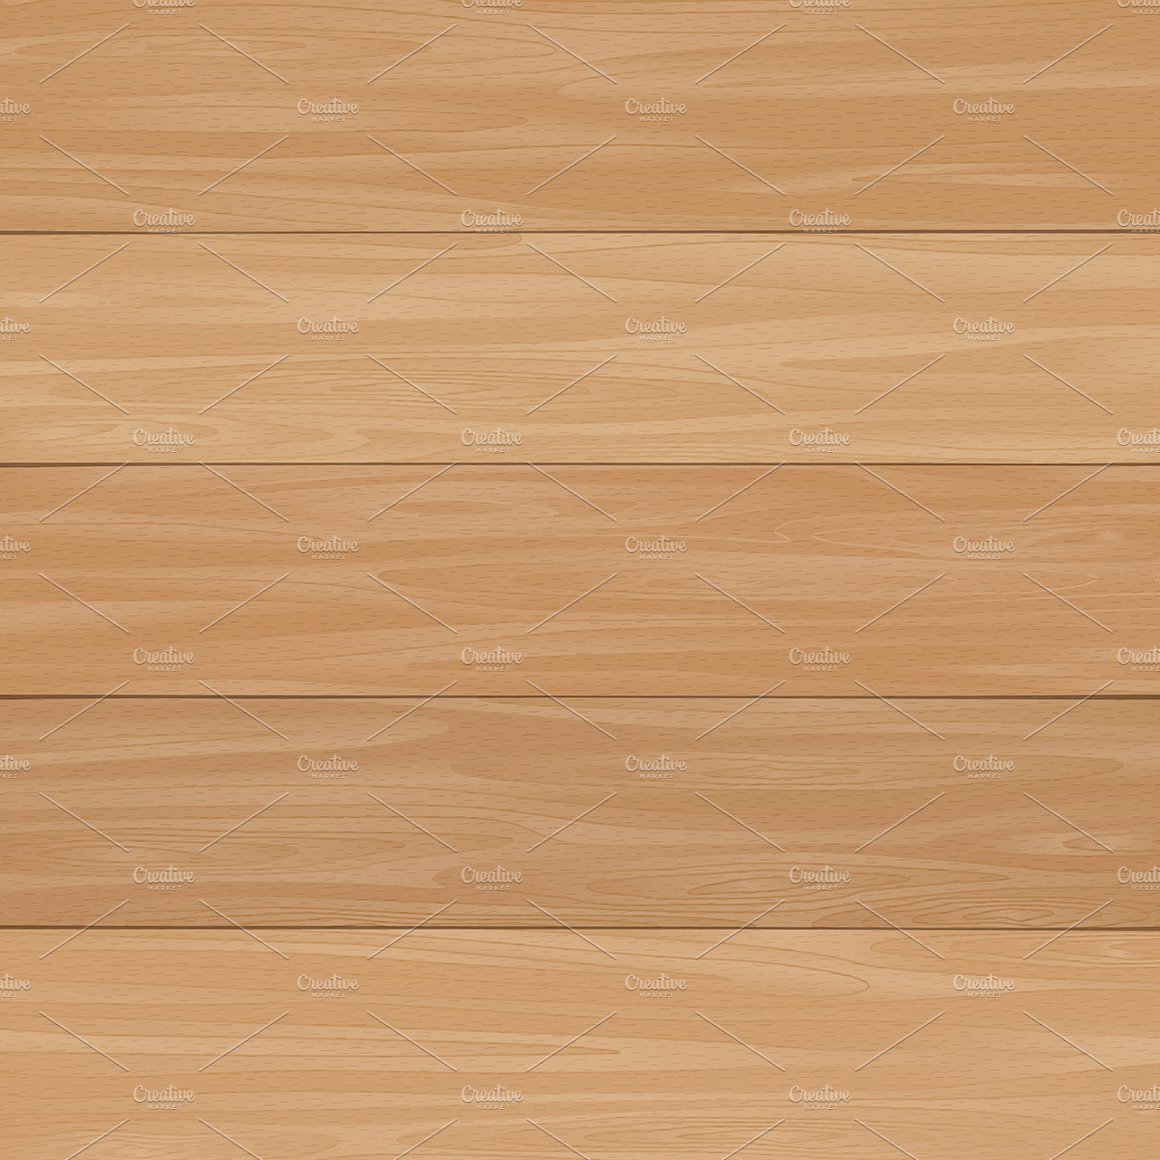 Woodgrain backgrounds preview image.